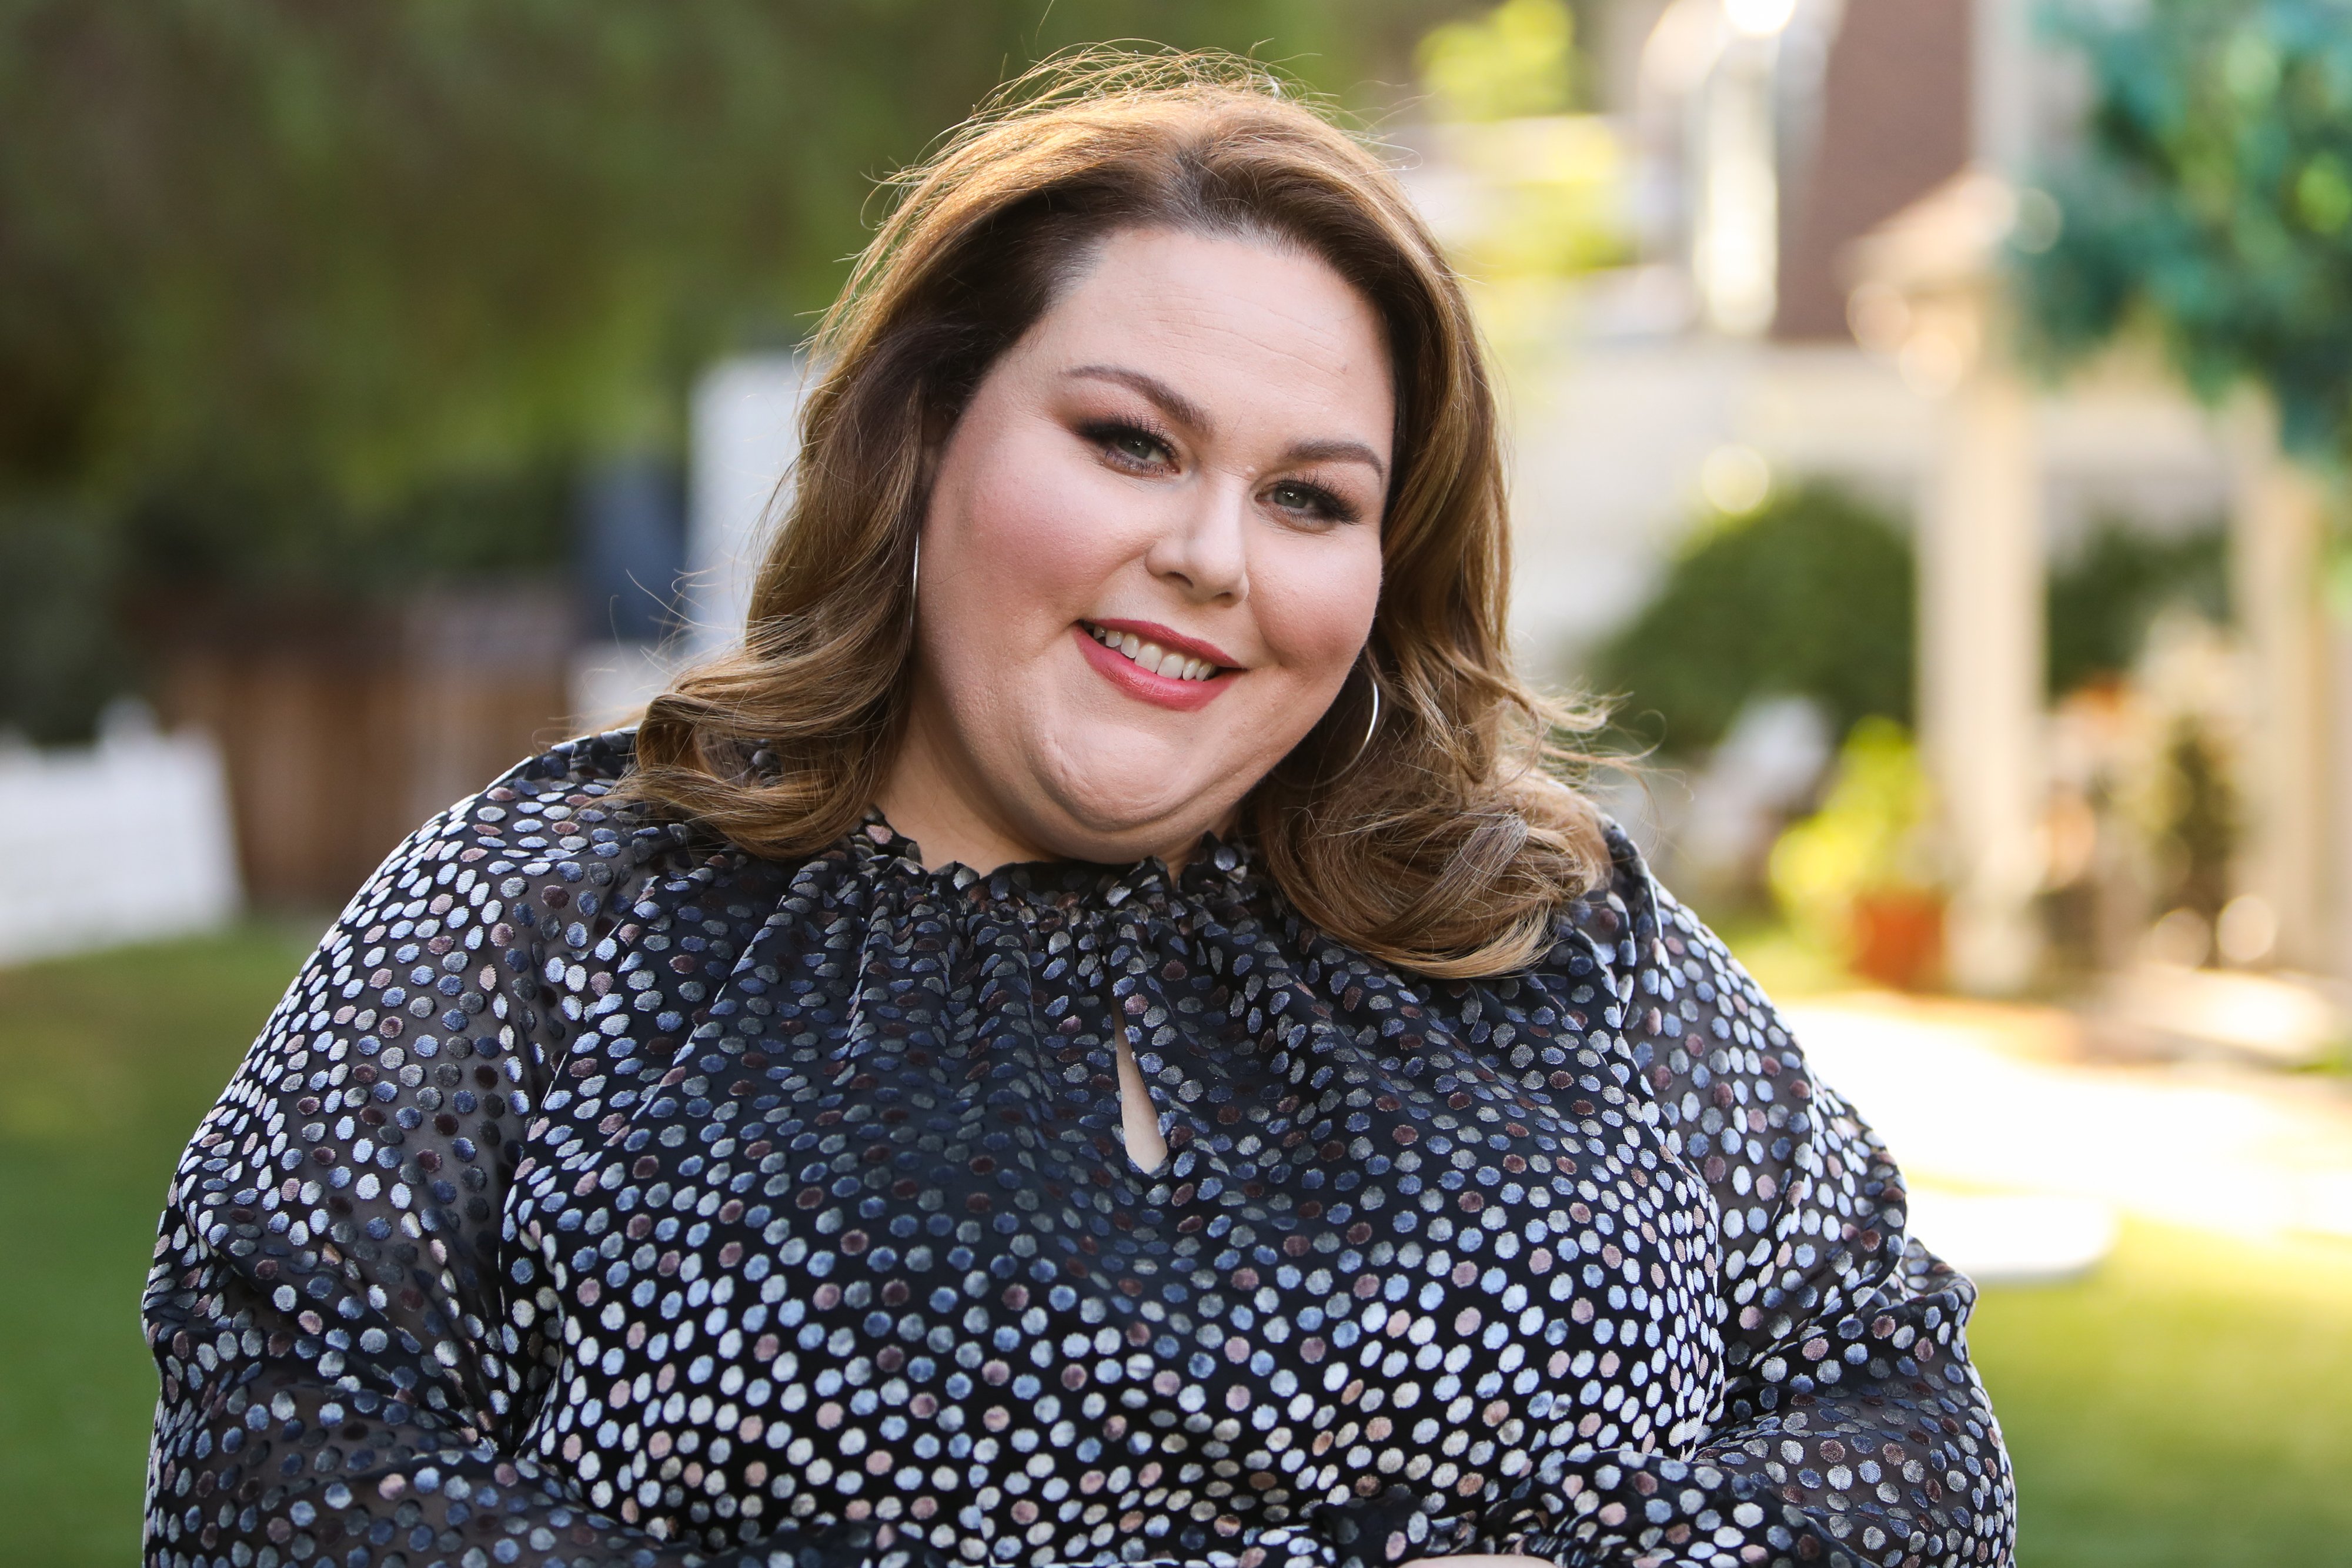 Chrissy Metz visits Hallmark Channel's "Home & Family" at Universal Studios Hollywood on December 12, 2020 in Universal City, California | Photo: Getty Images